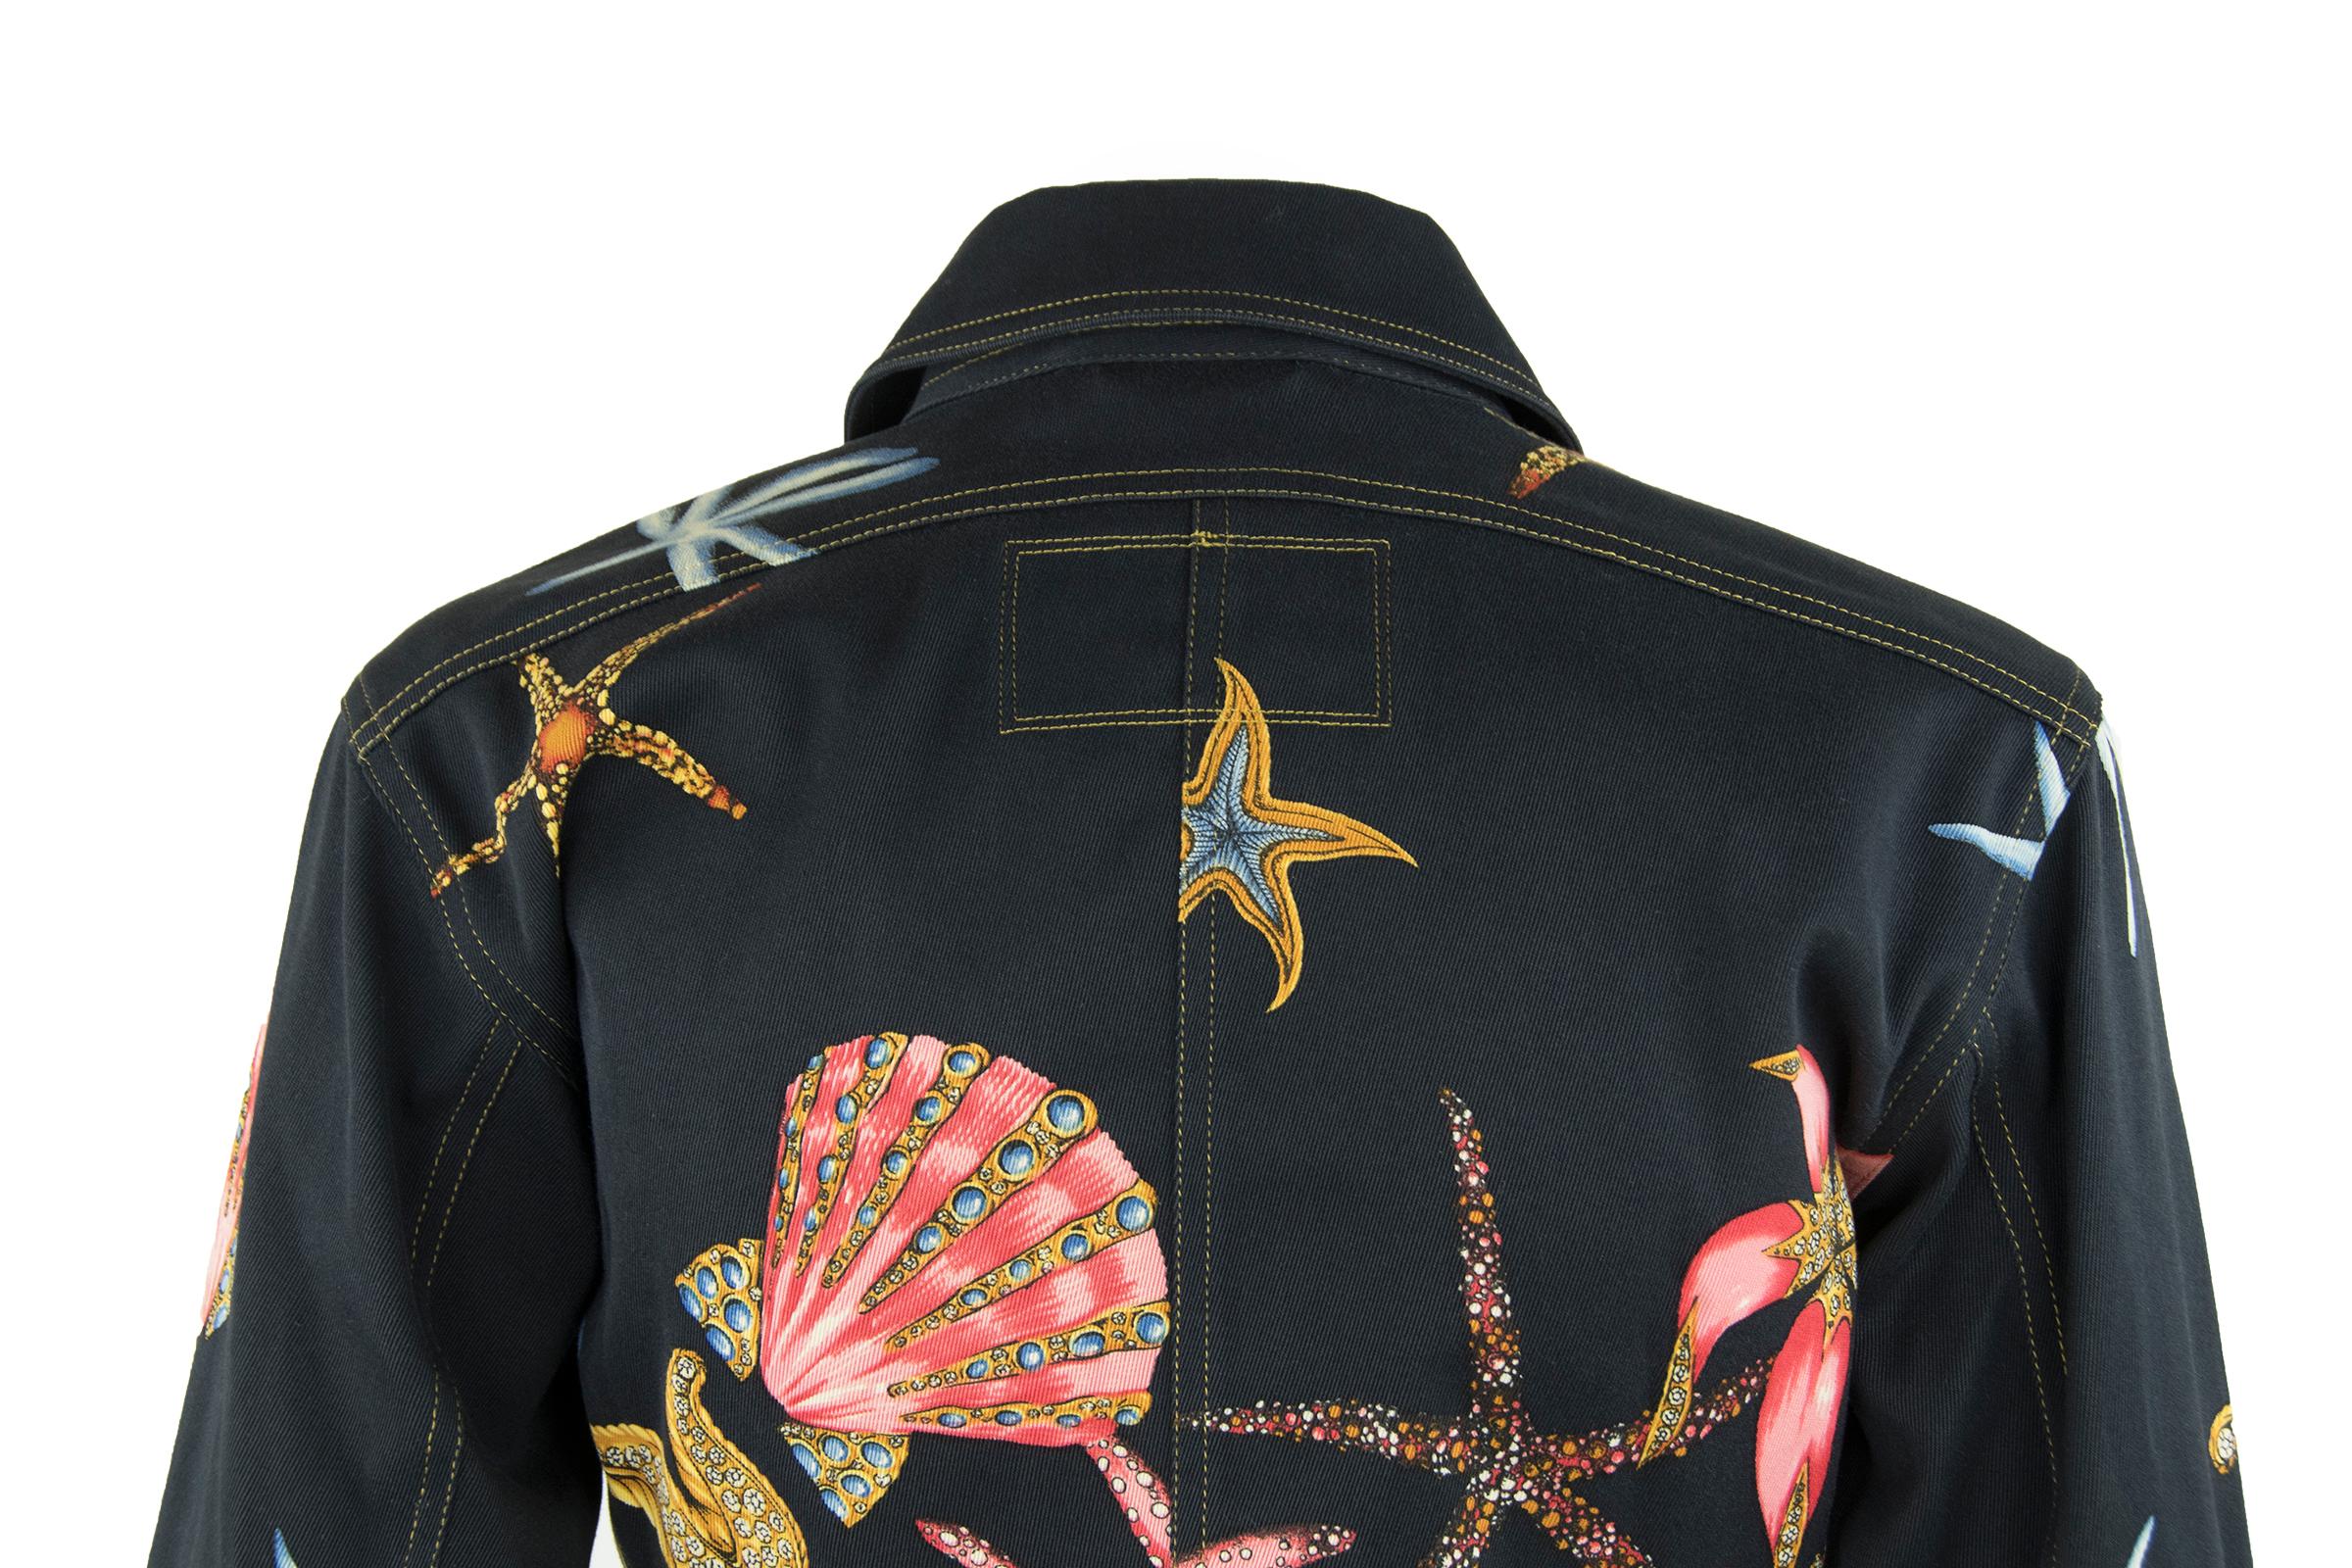 Vintage Gianni Versace Starfish Jacket - Size XS/S In Excellent Condition For Sale In Newport, RI